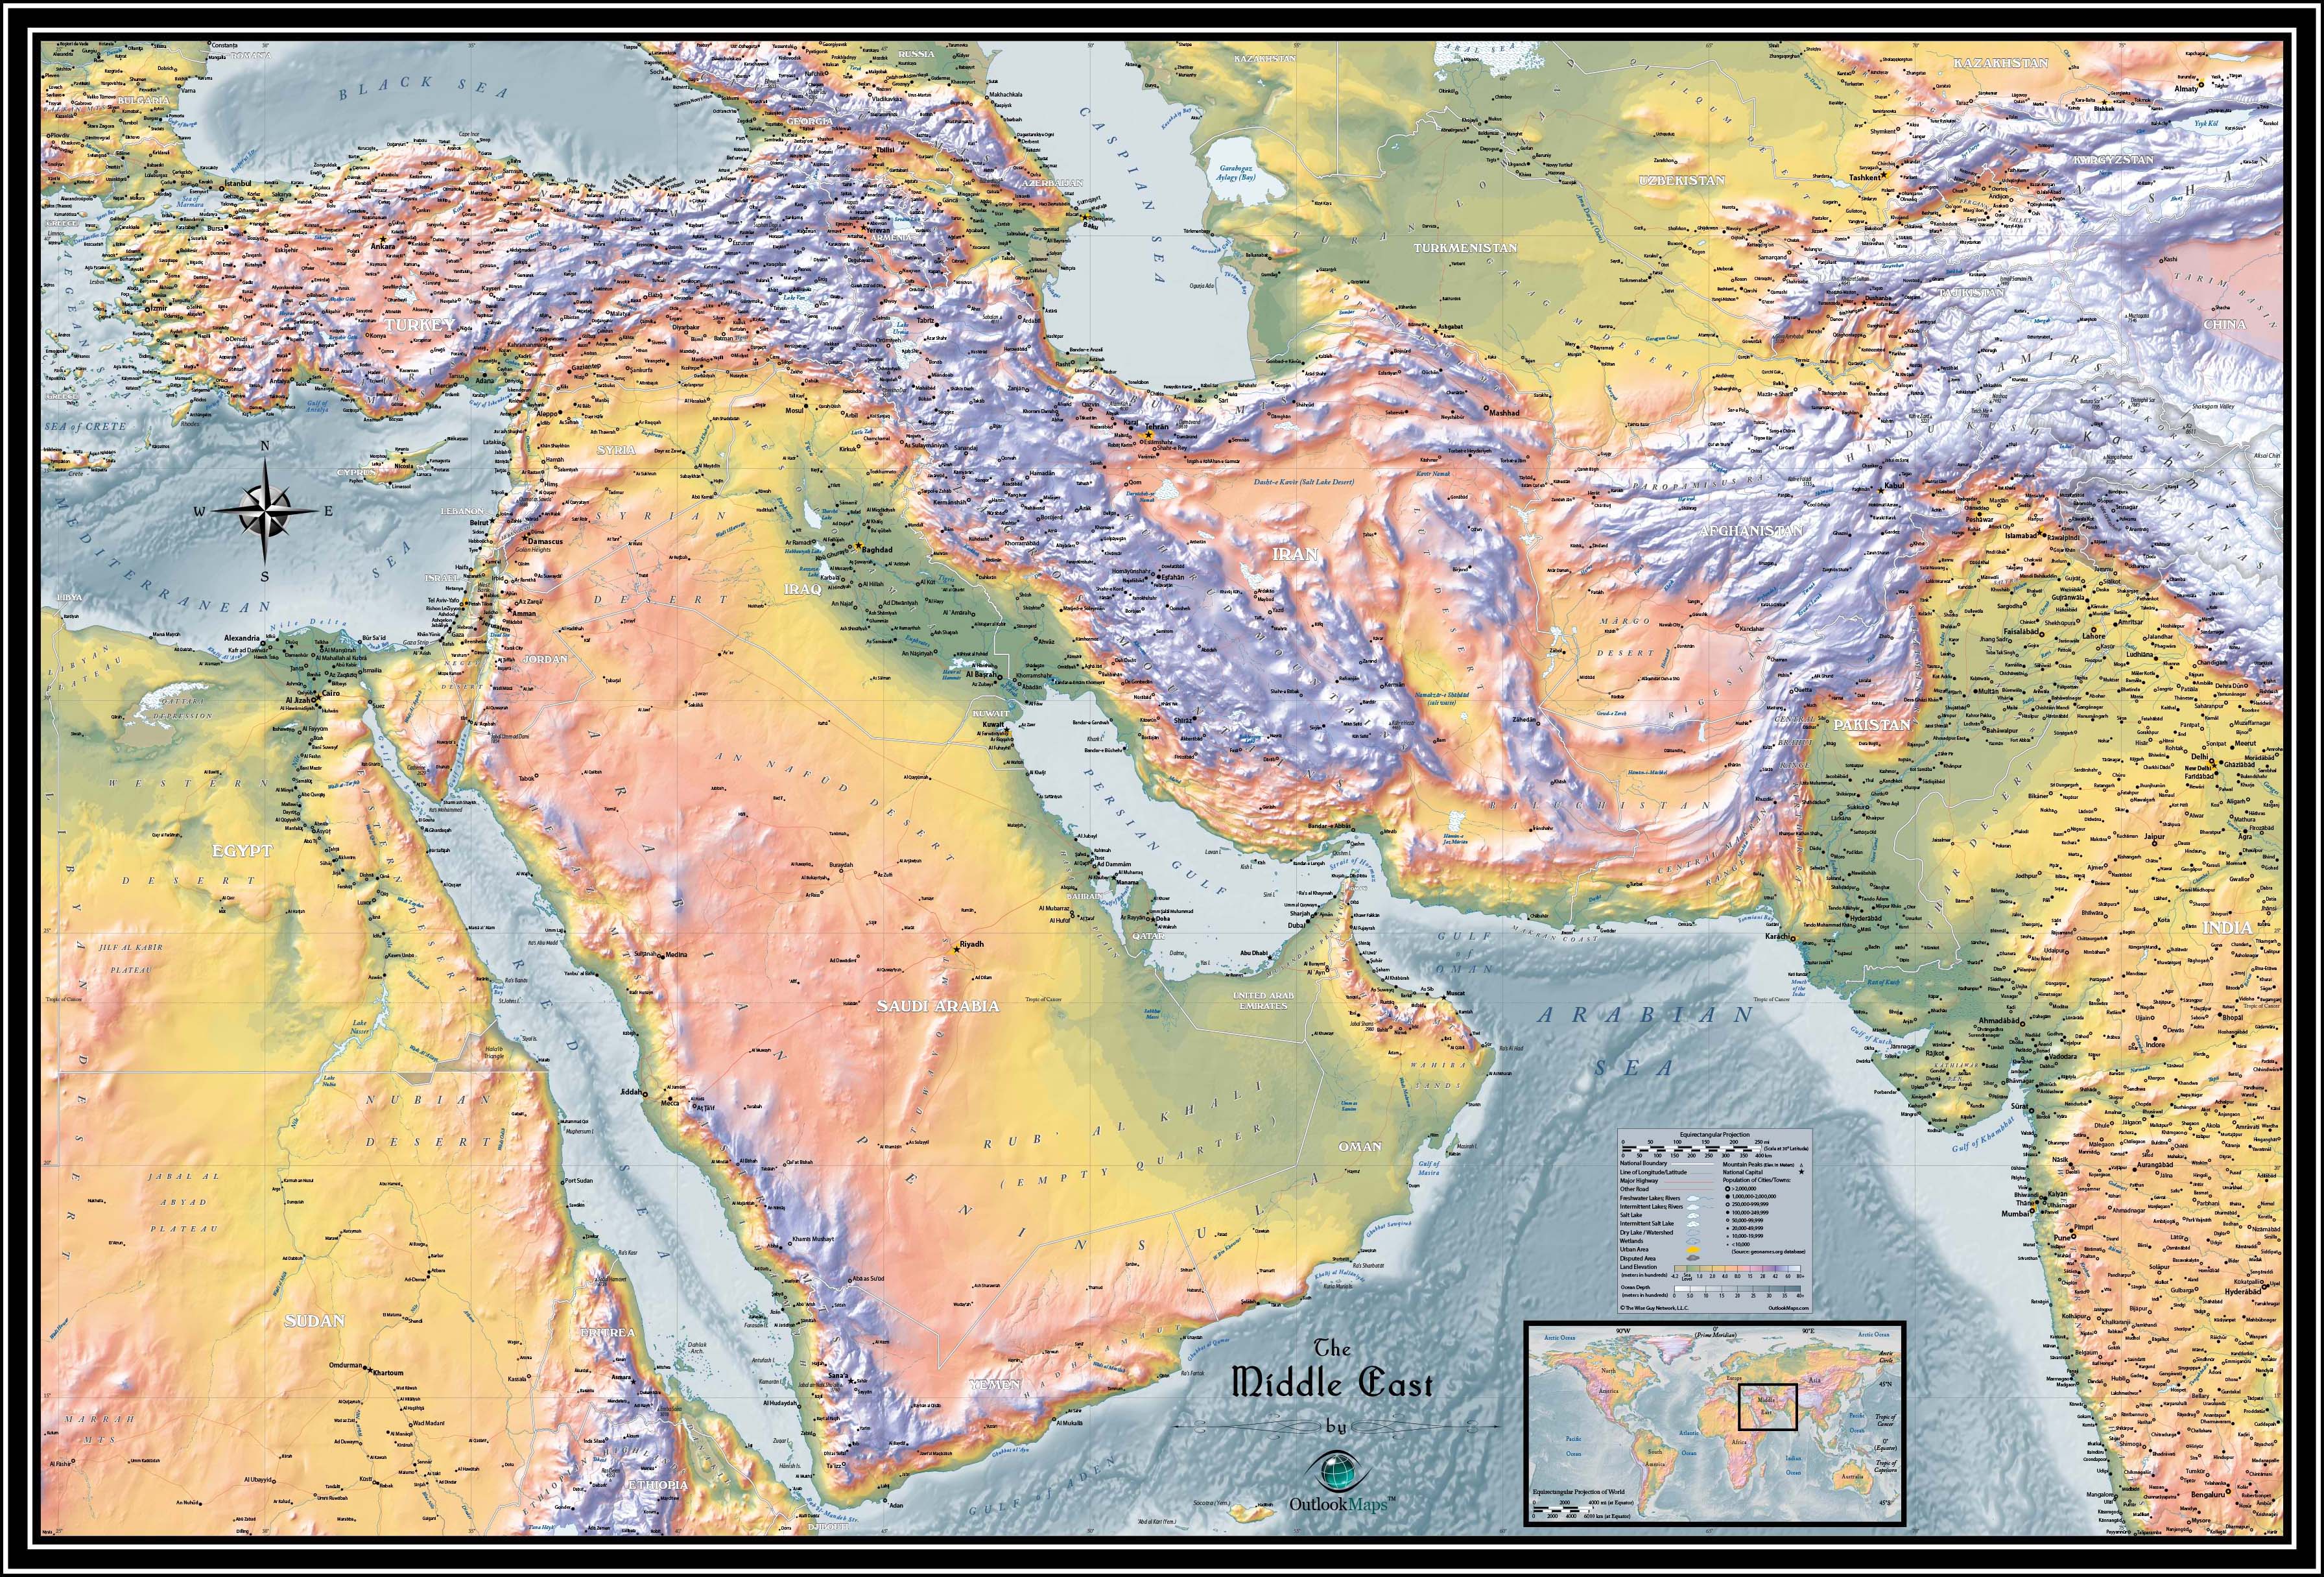 Middle East Physical Features Map